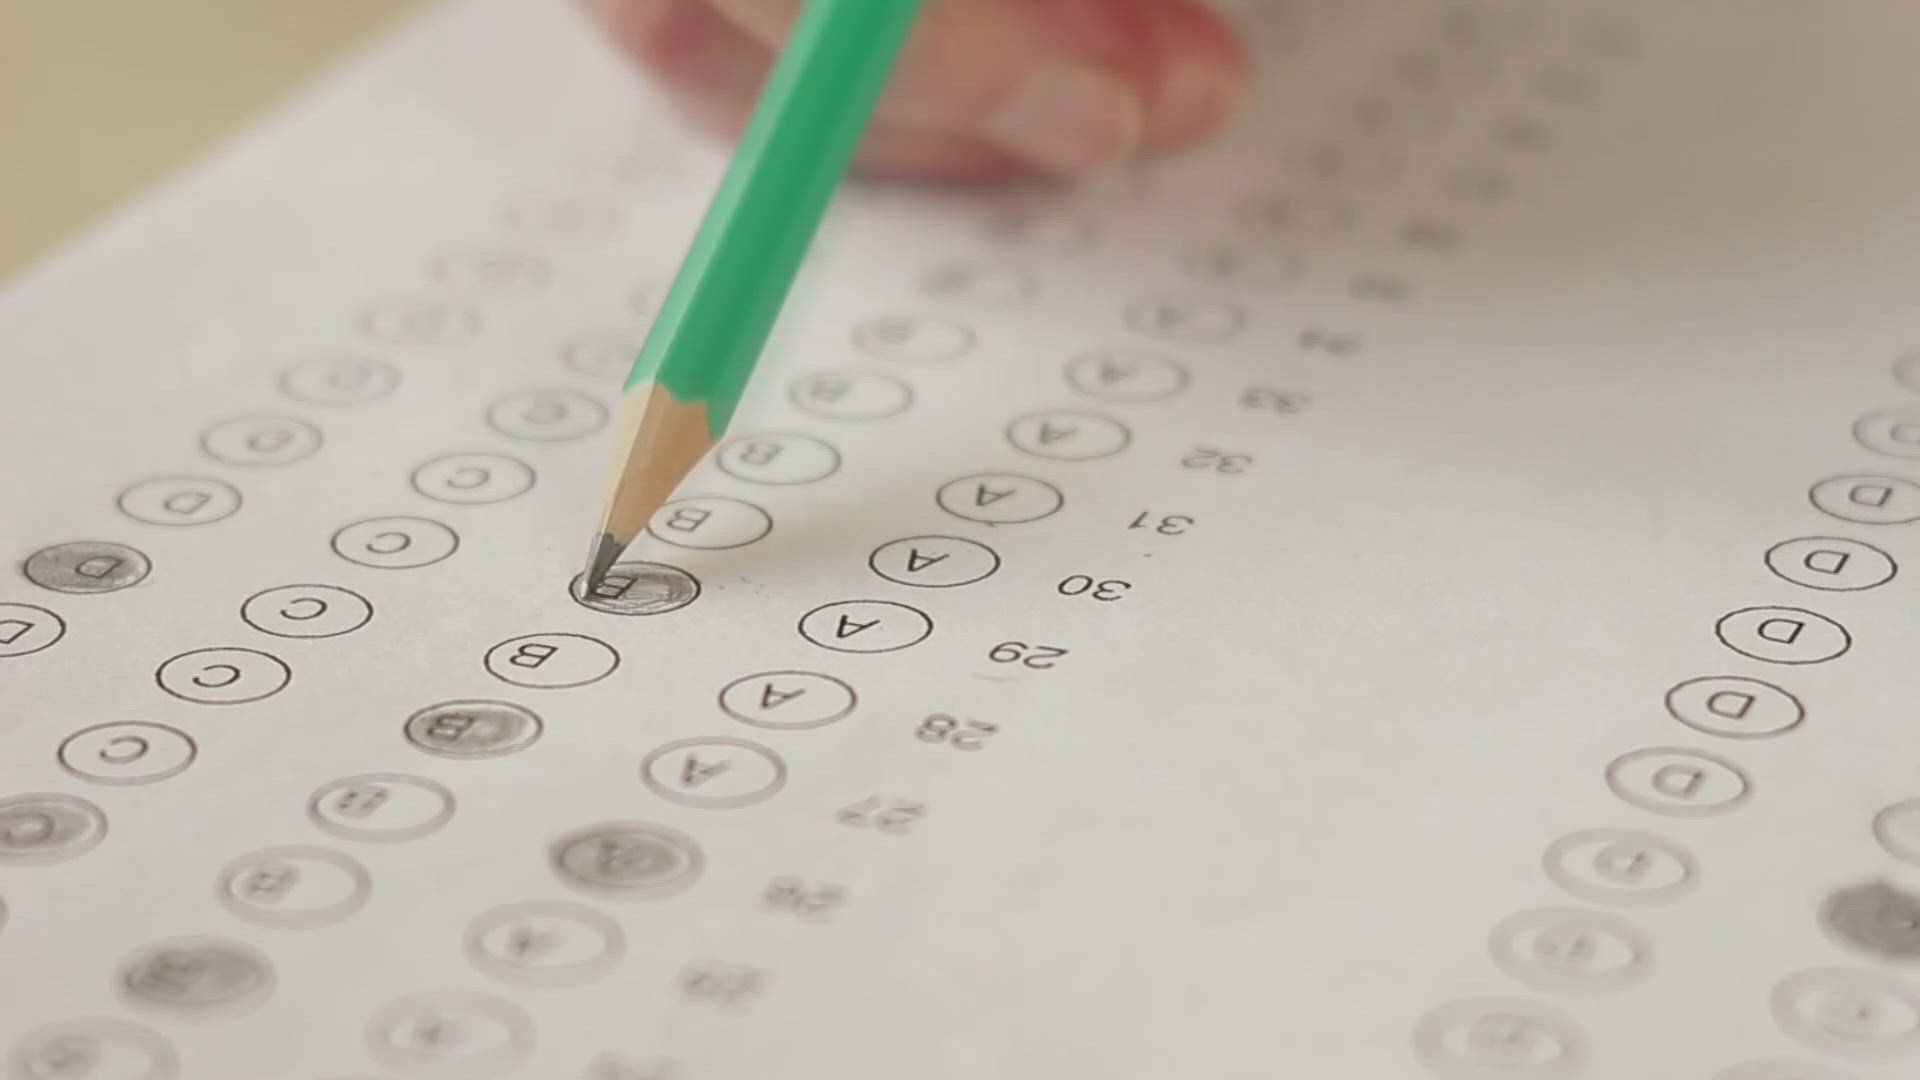 Thousands of 3rd graders are facing the possibility of repeating the grade due to test score results showing 35% of students in KCS did not score well.